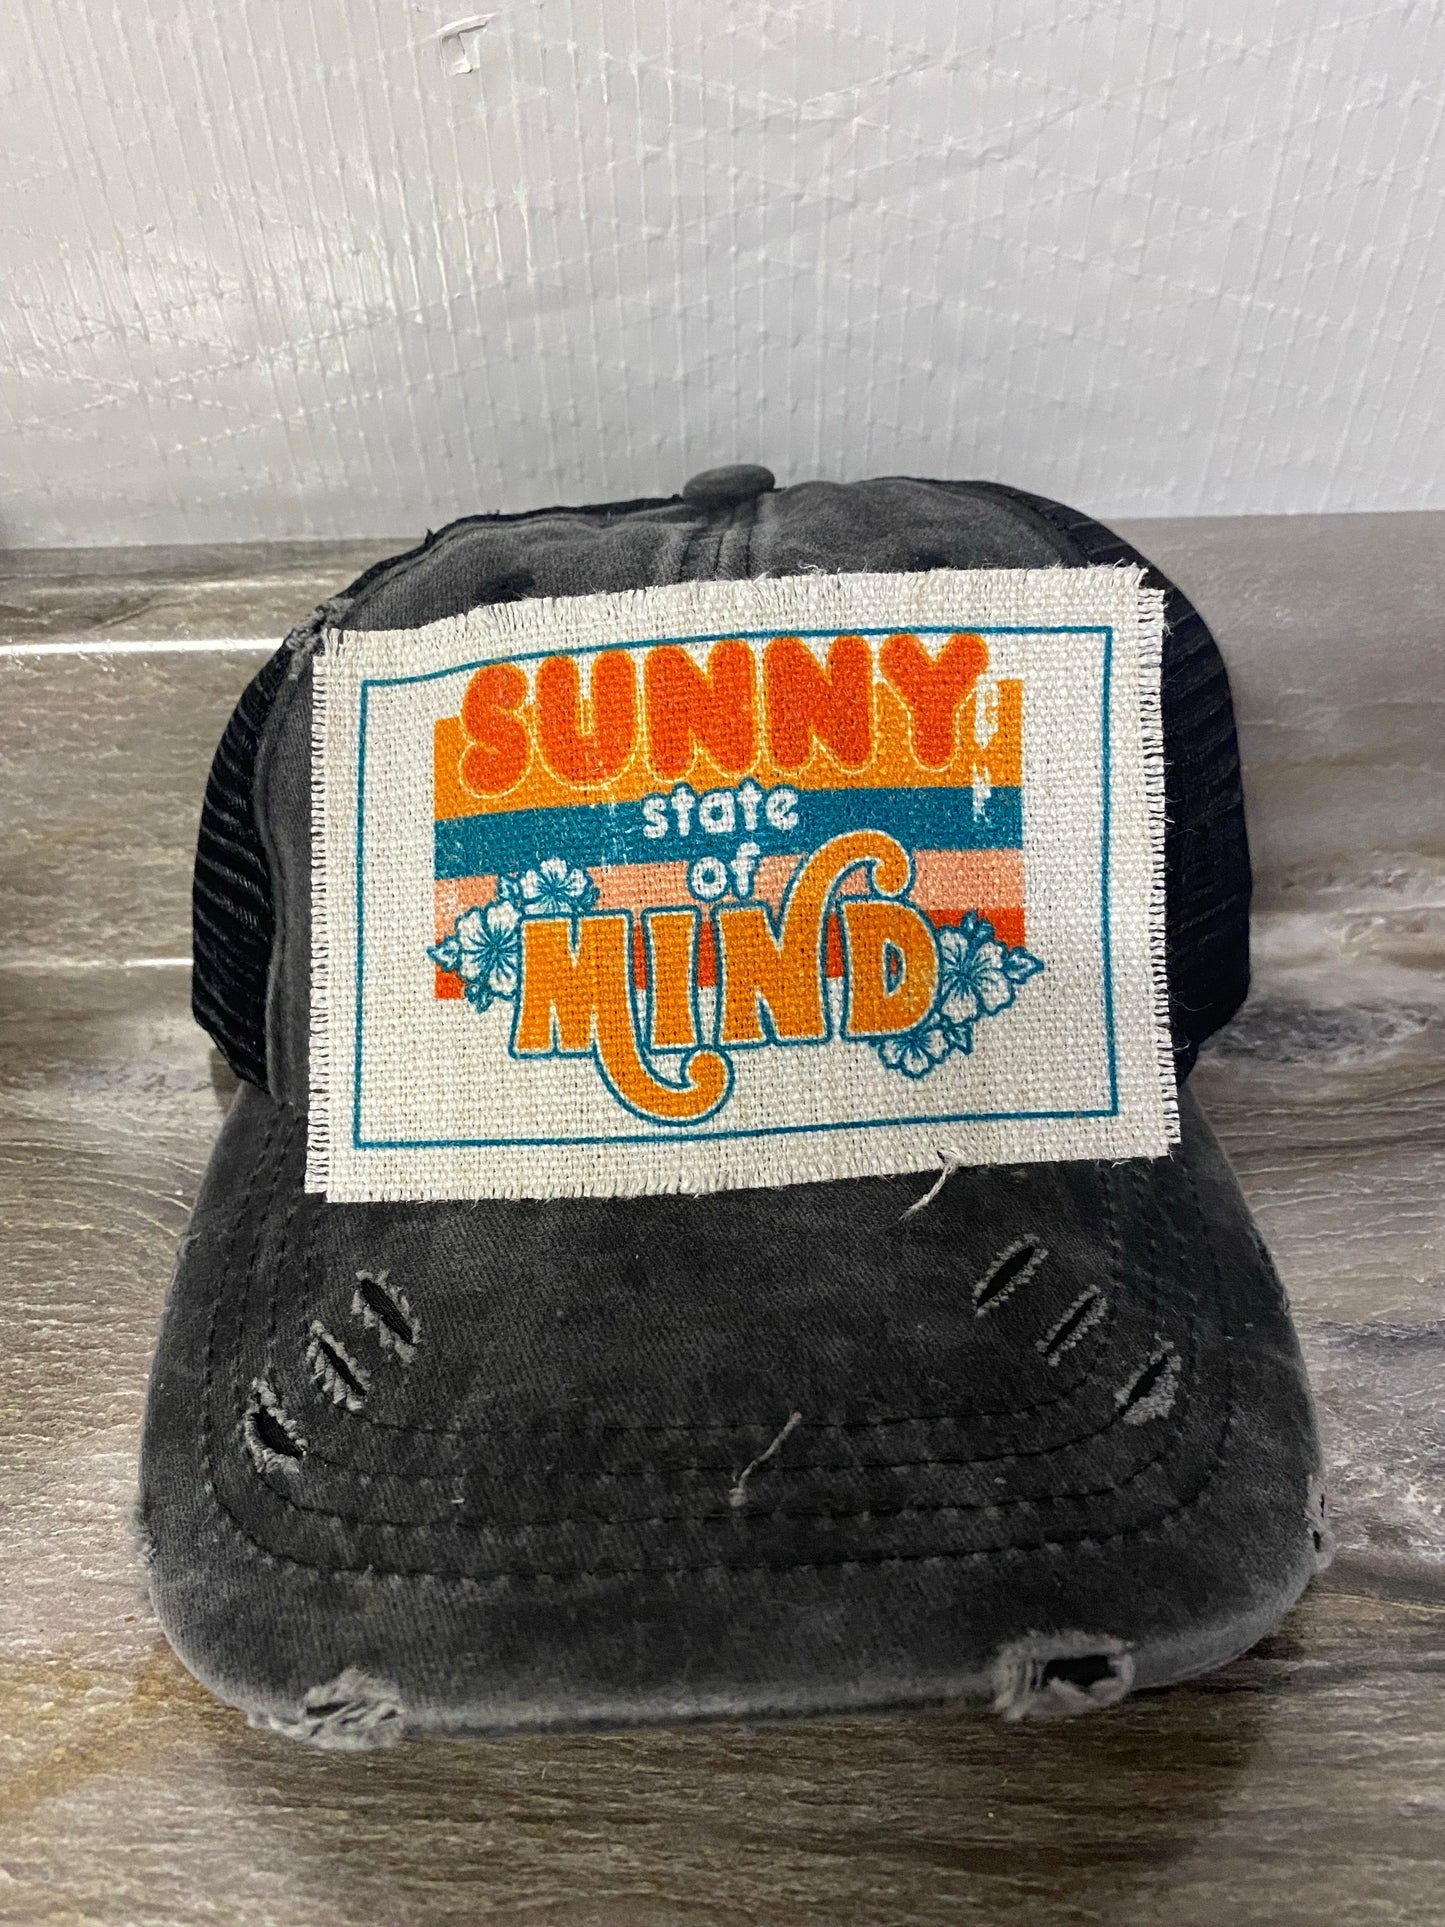 Sunny State of Mind Hat Patch